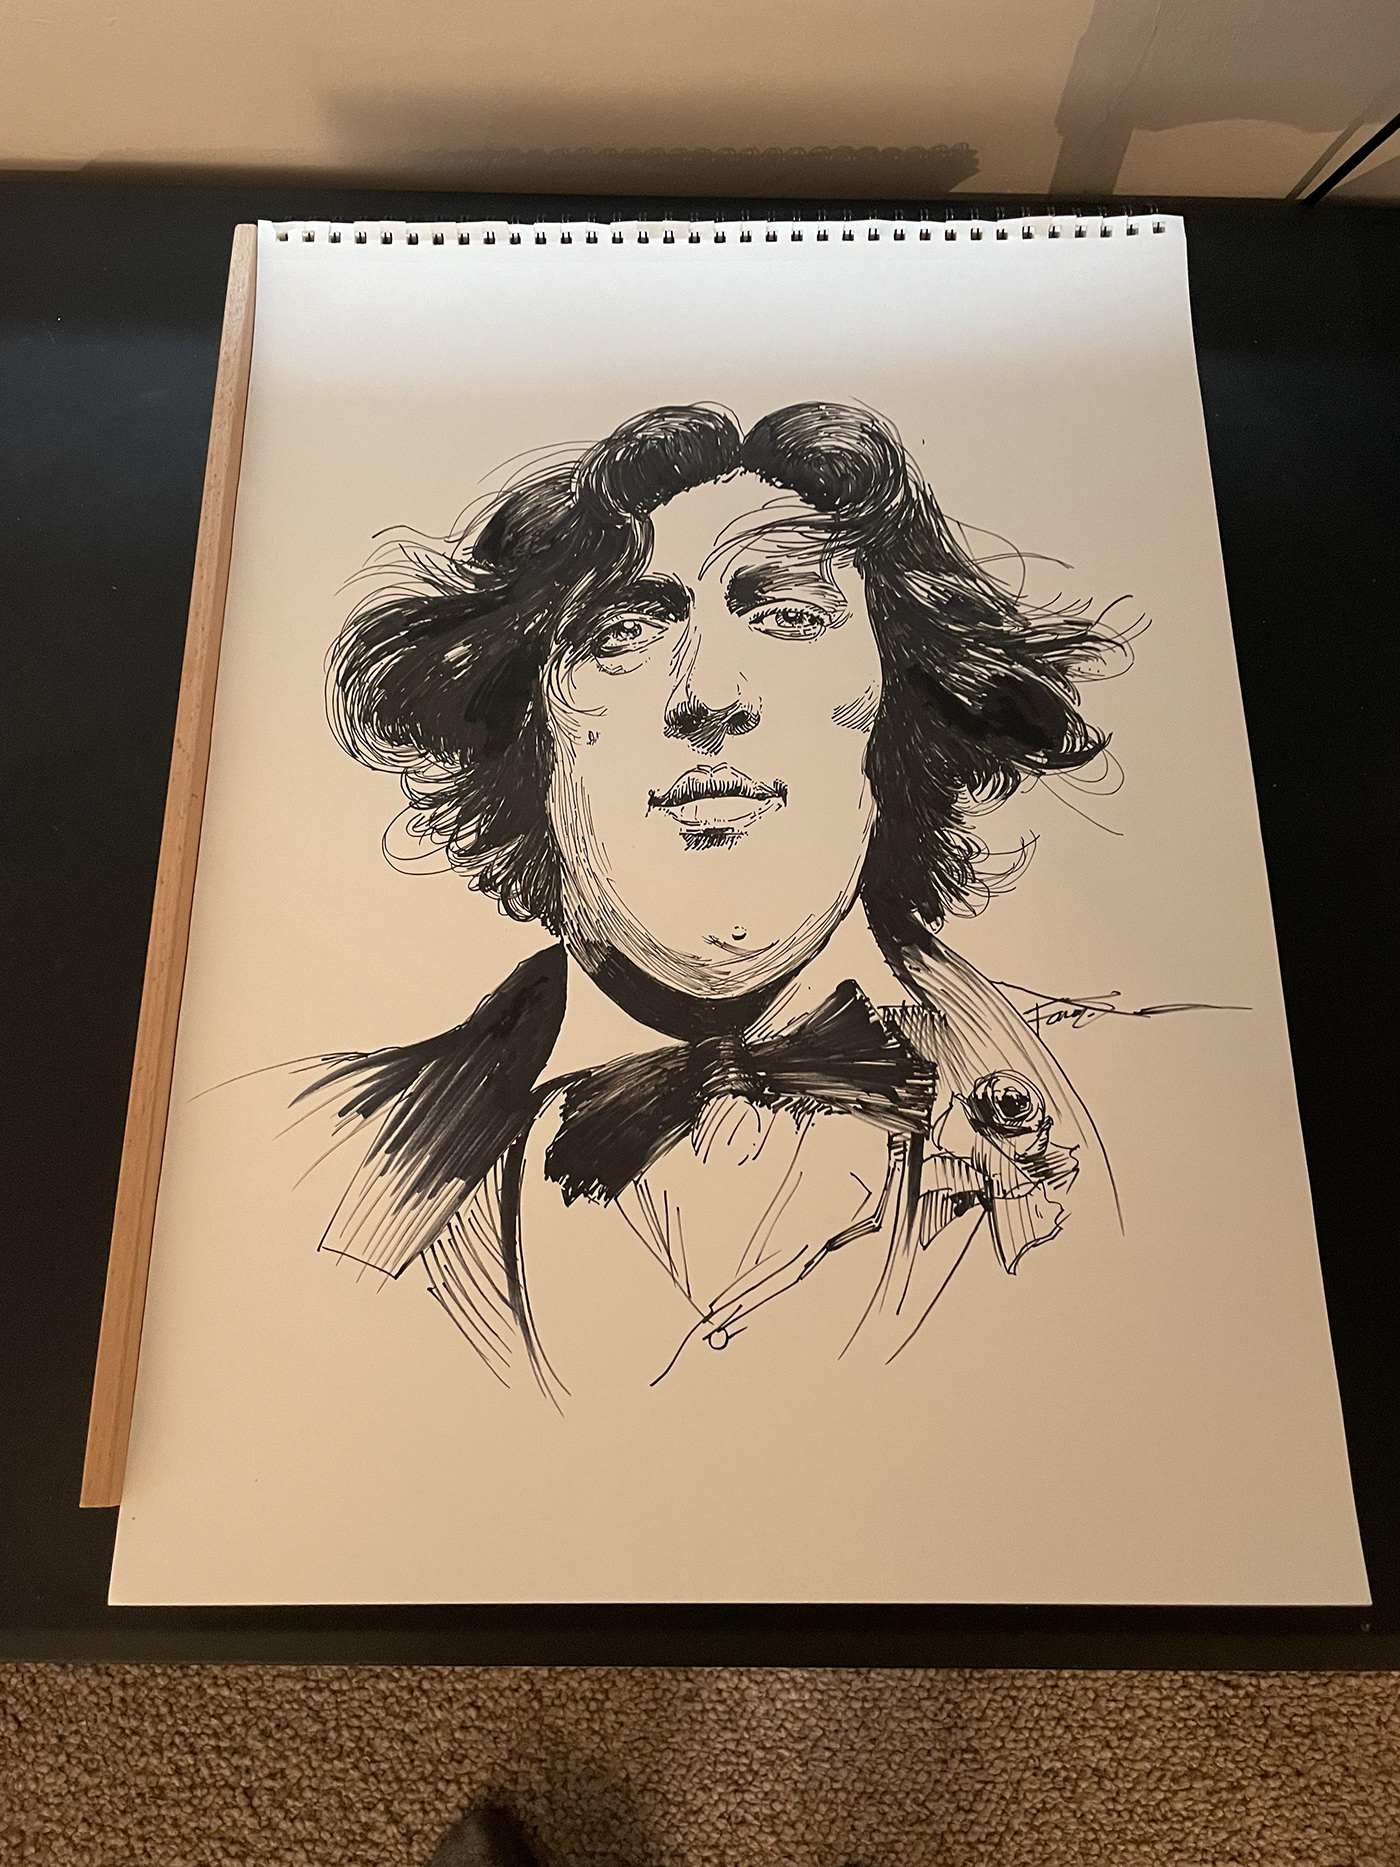 Oscar Wilde ILLUSTRATION  pen and ink Author Playwright activist lbqt